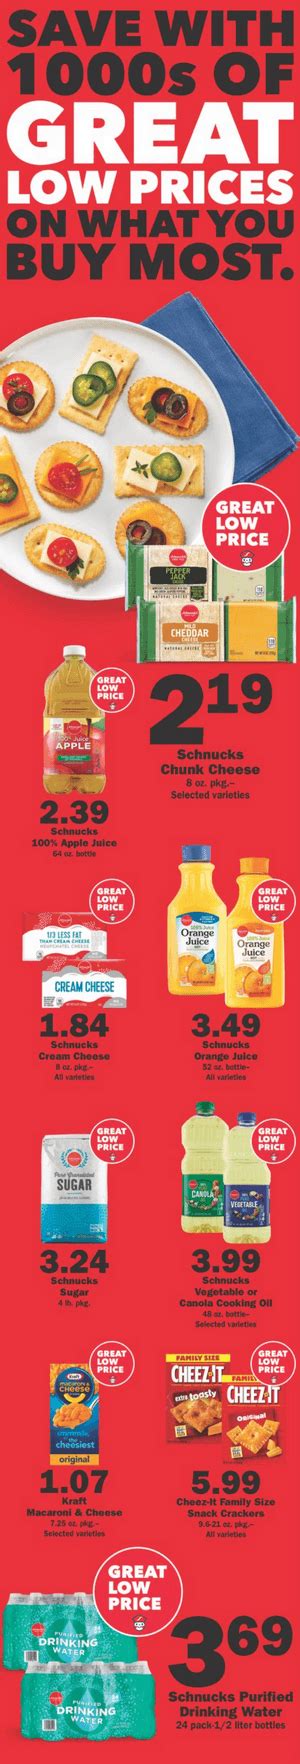 Is schnucks open on memorial day. Nov 10, 2022 · New Year’s: Saturday, December 31 (New Year’s Eve) – Close at 8 p.m. Sunday, January 1 (New Year’s Day) – Open at 9 a.m. Stores will be open their regular operating hours during all other days not listed. 